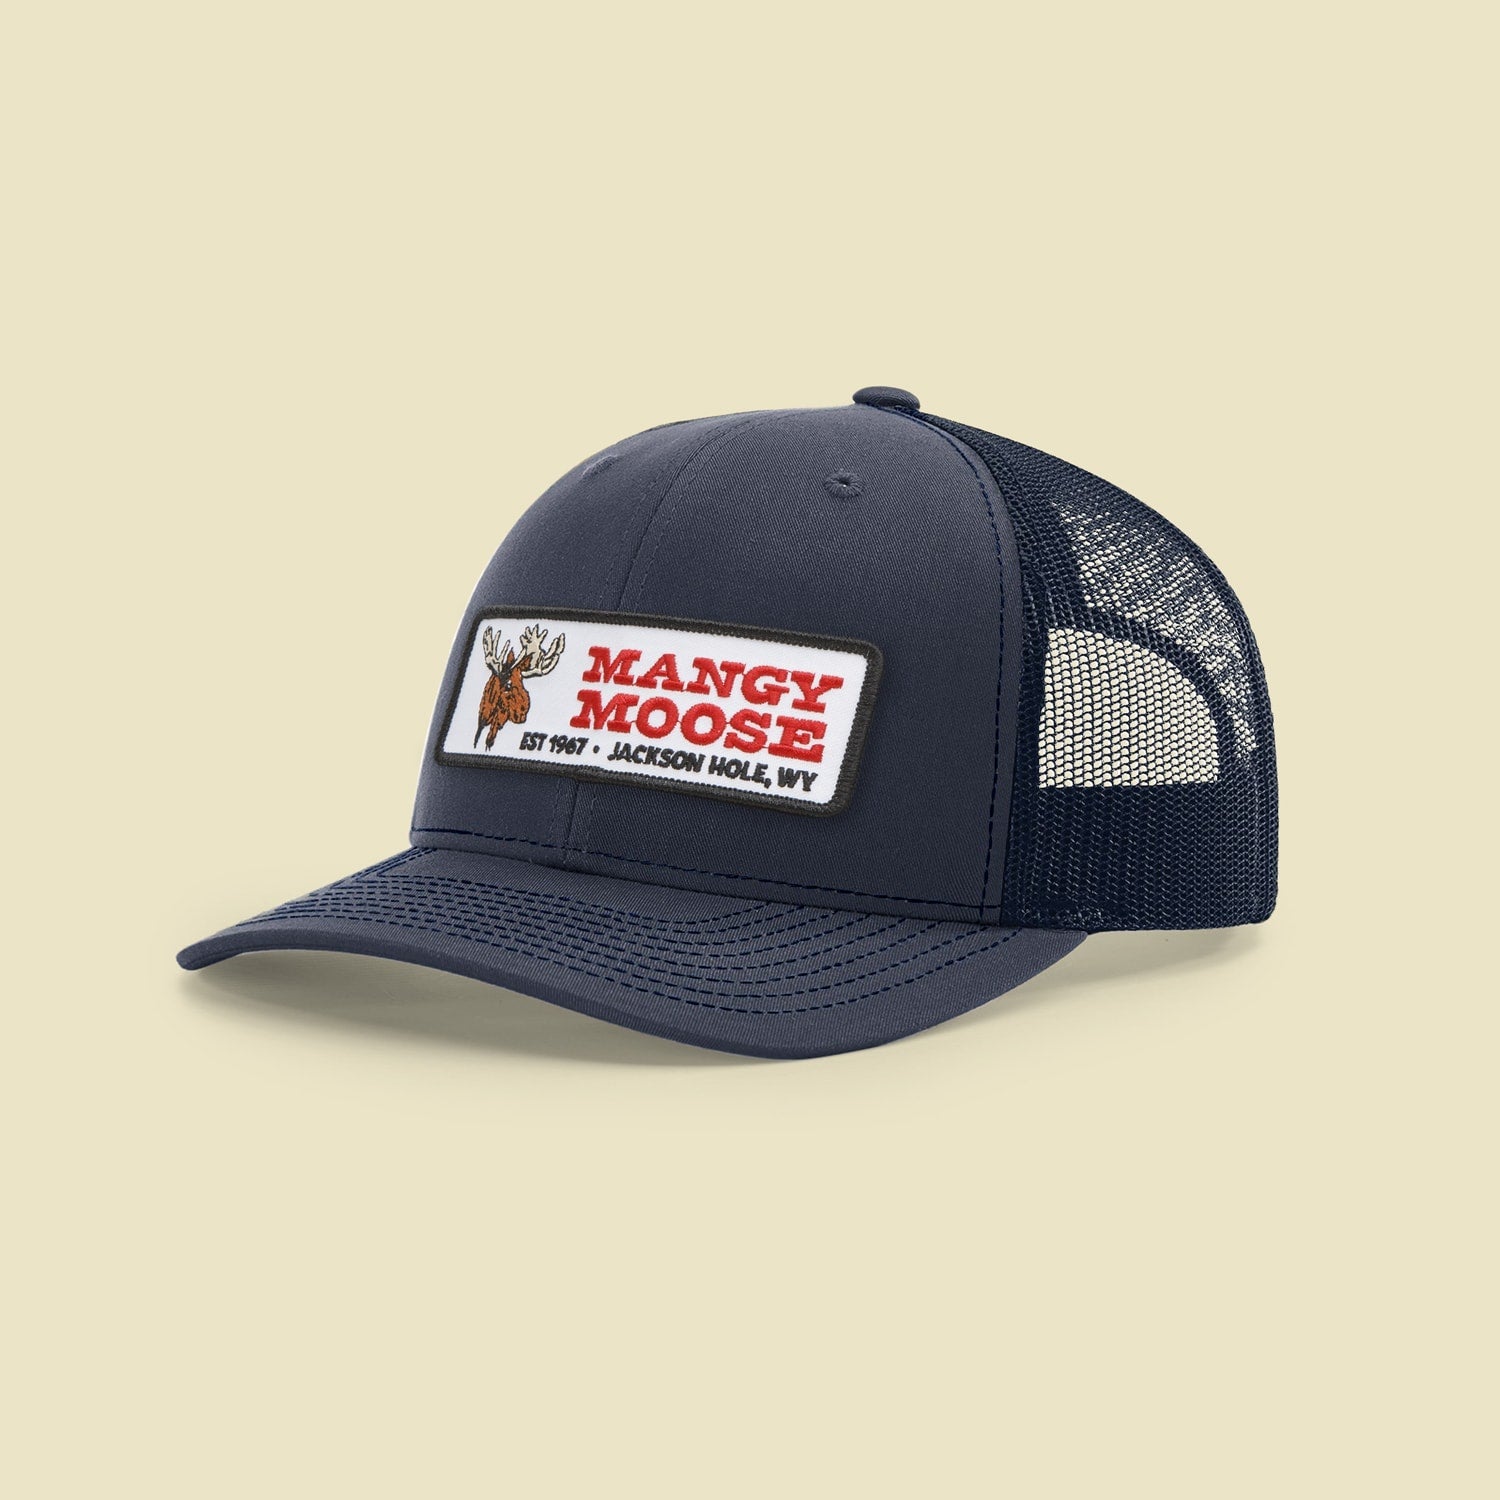 Manny Five Panel Trucker Hat - The Mangy Moose